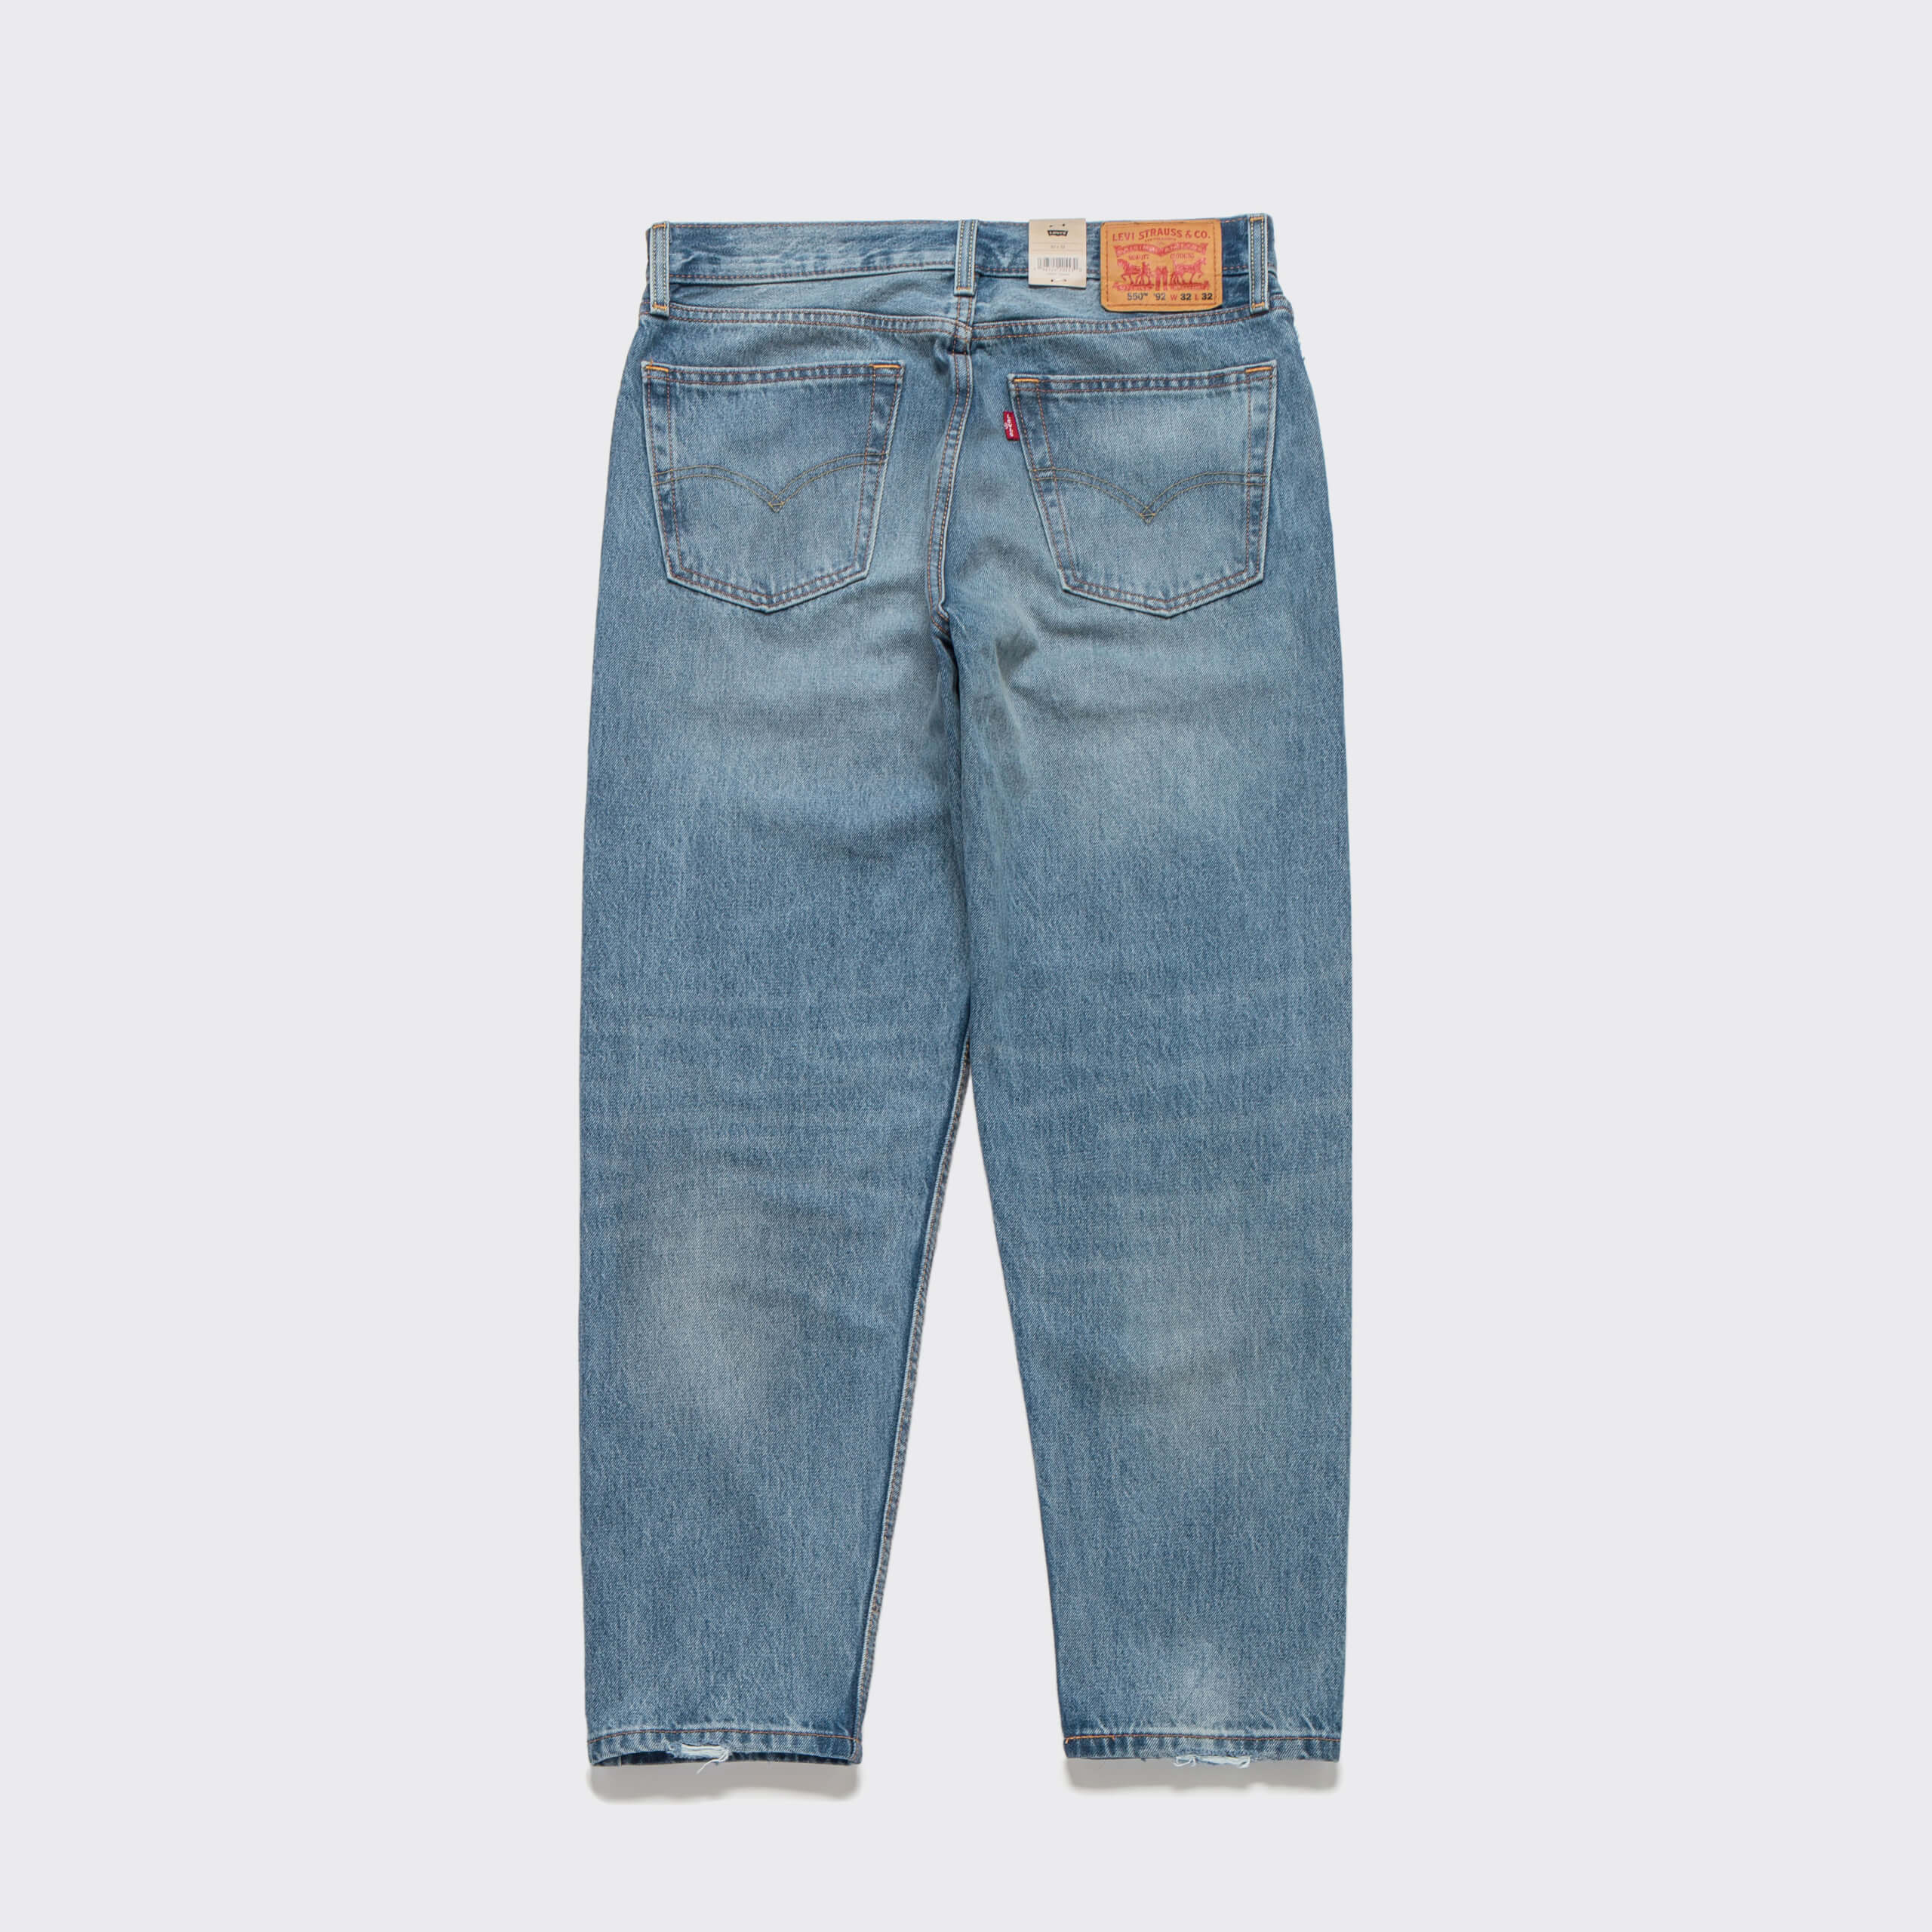 550-92-relaxed-tapered-jeans-indigo_p1